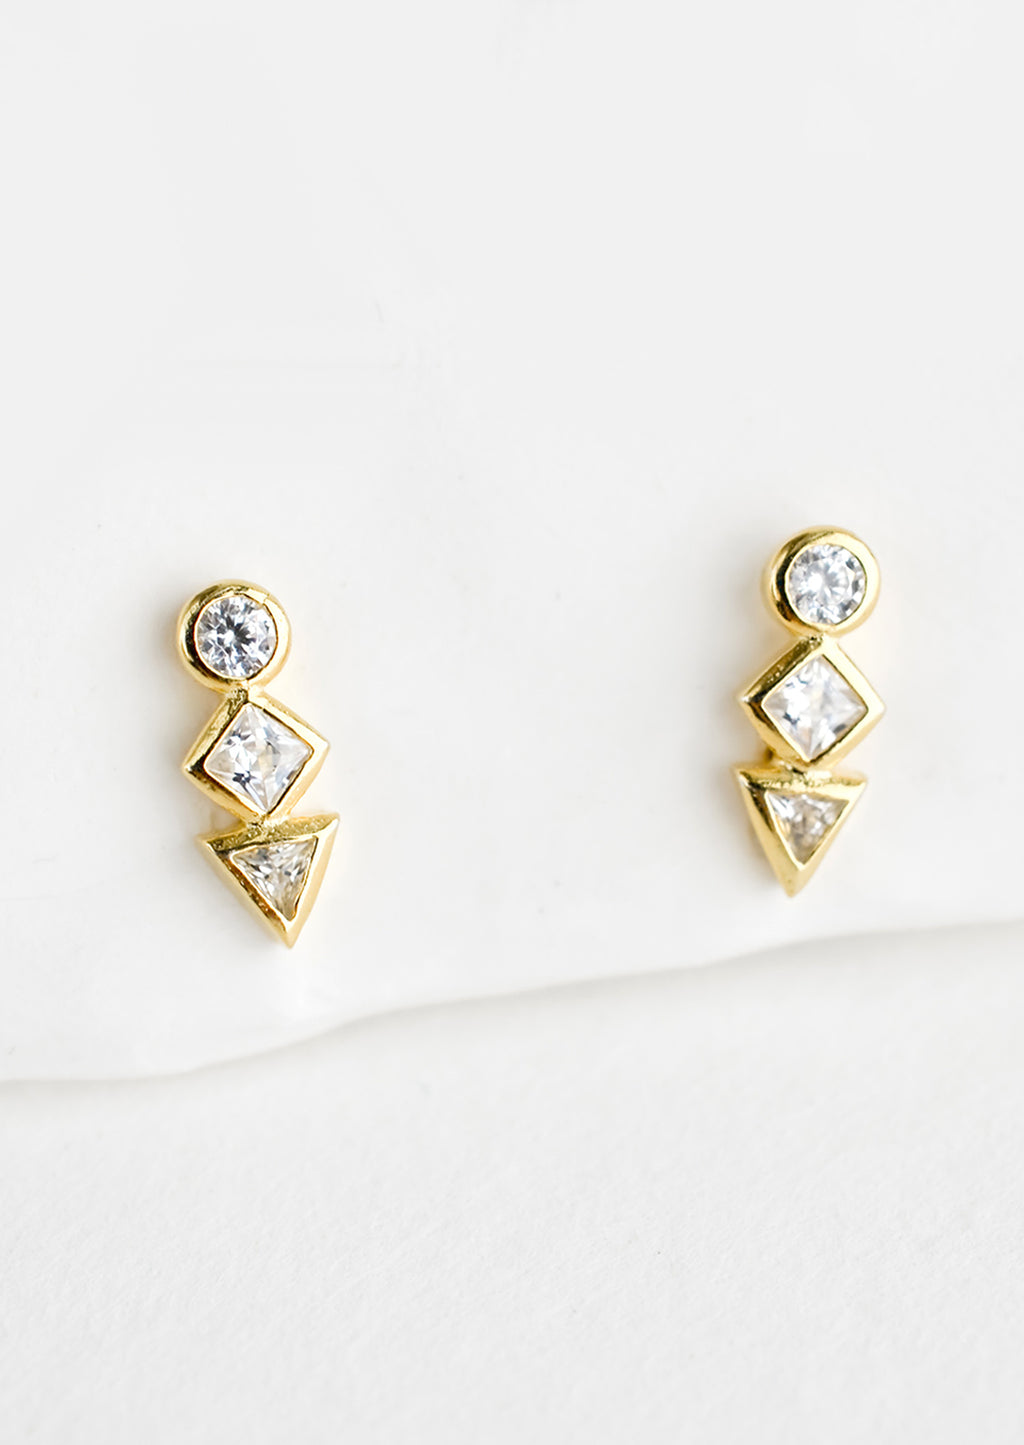 1: A pair of gold stud earrings with a circle, diamond and triangle crystal stacked in a row.